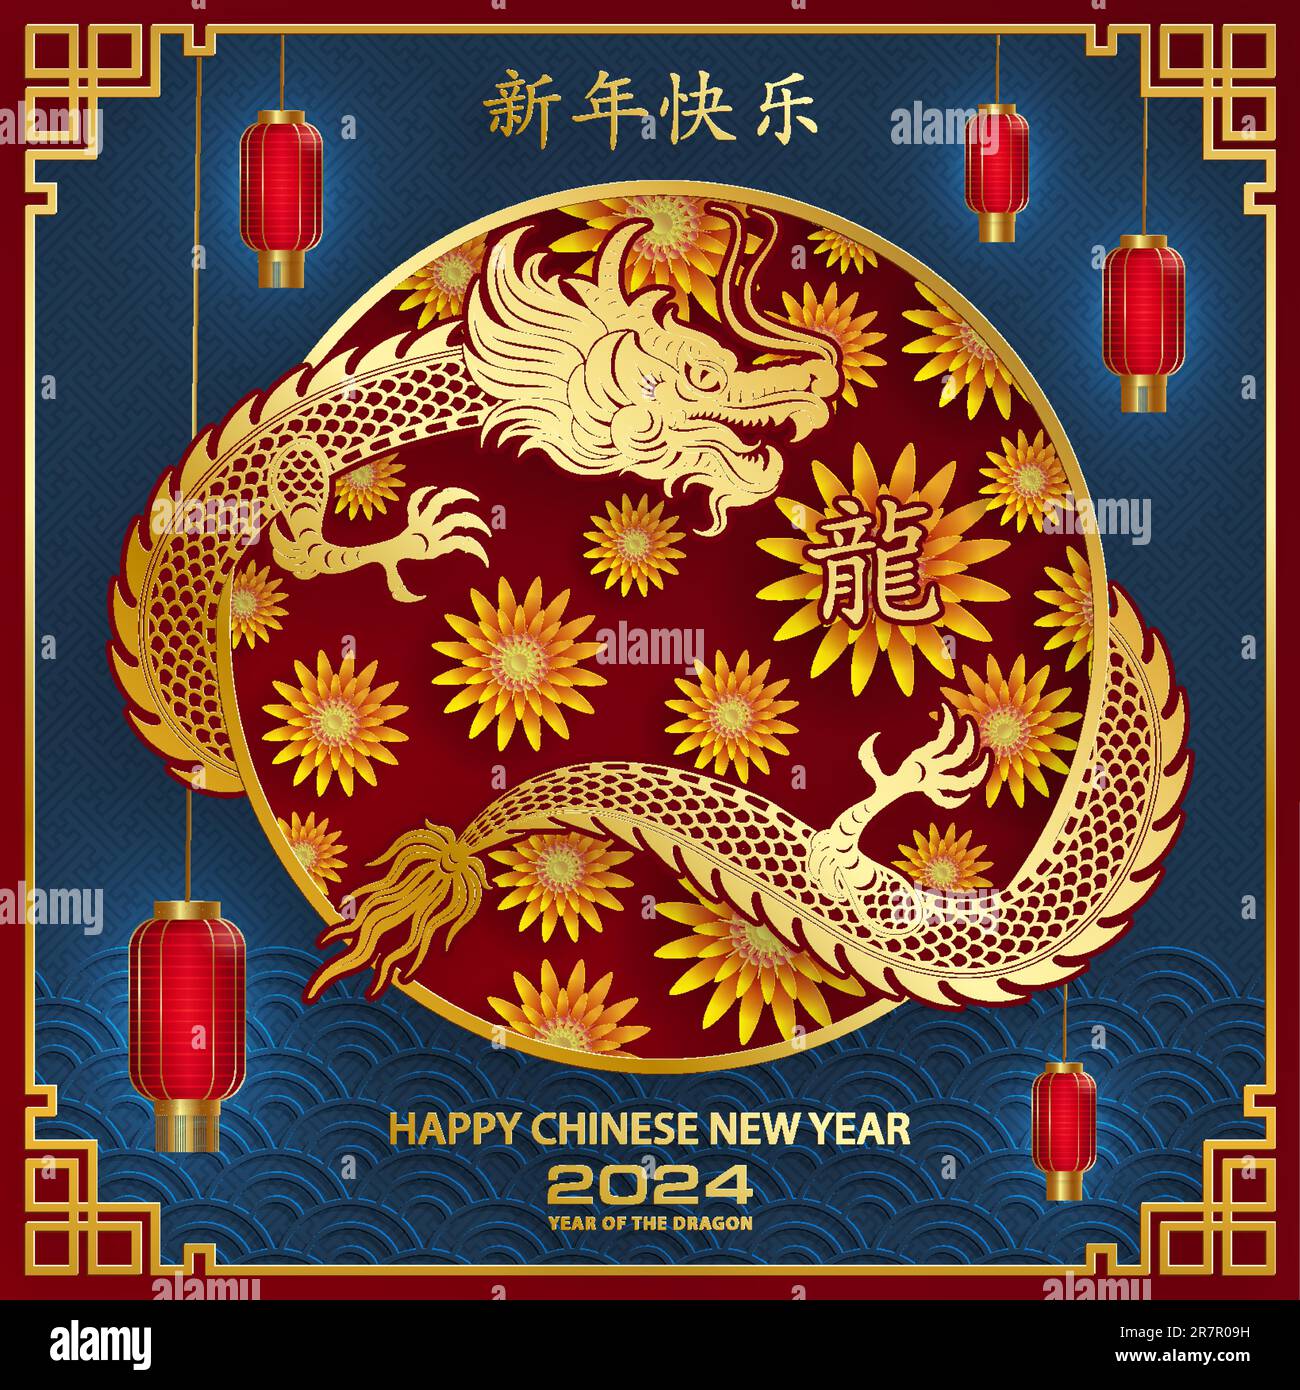 Happy Chinese New Year 2024. Chinese dragon gold zodiac sign on